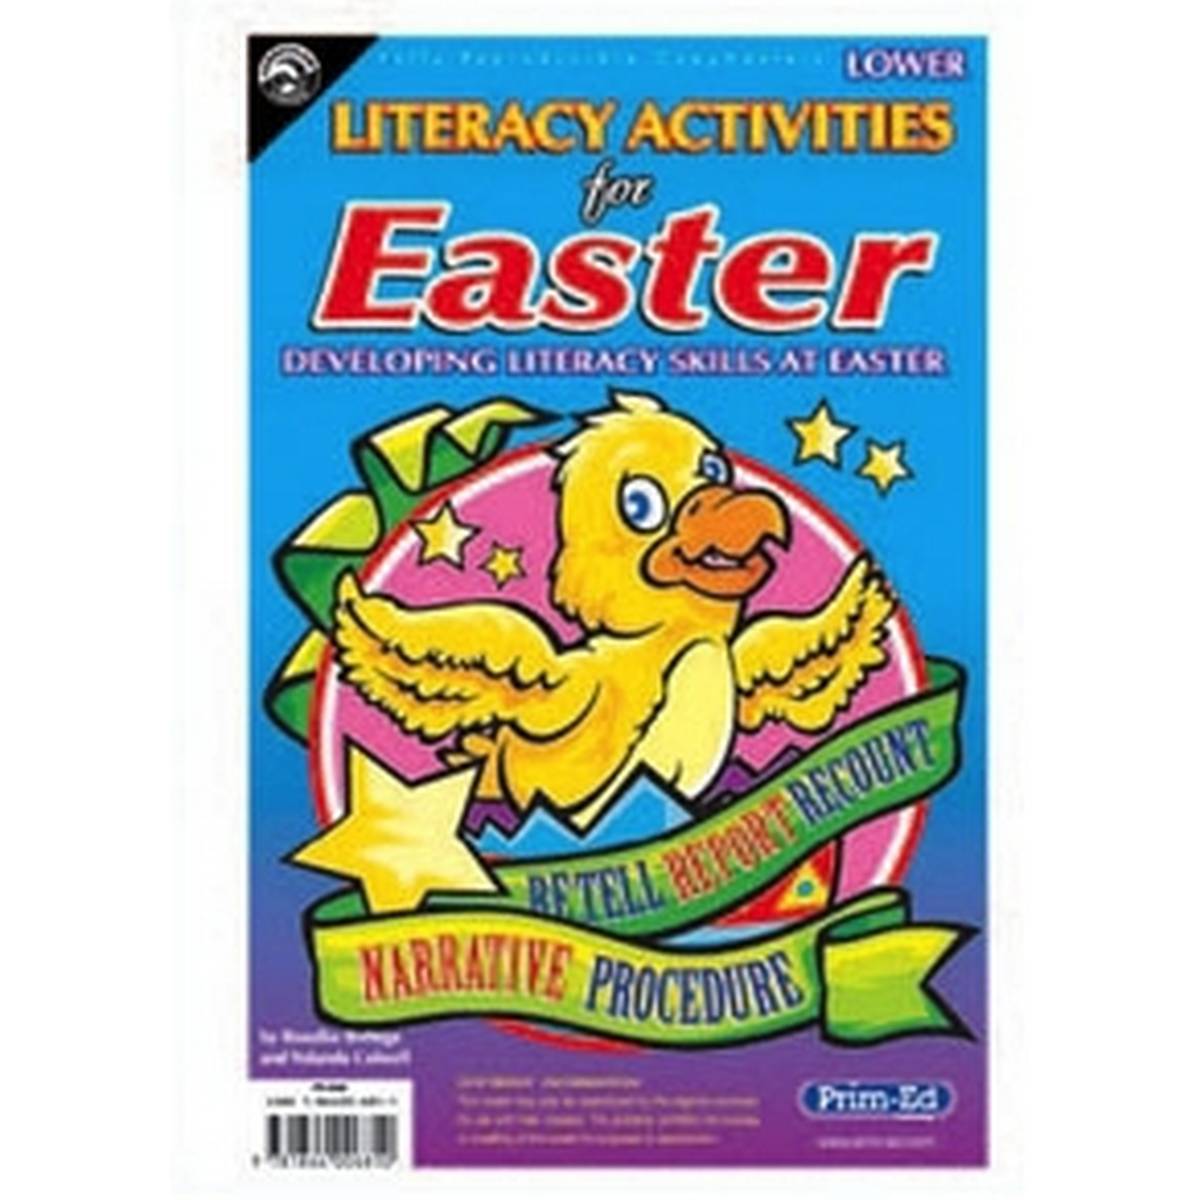 Literacy Activities for Easter